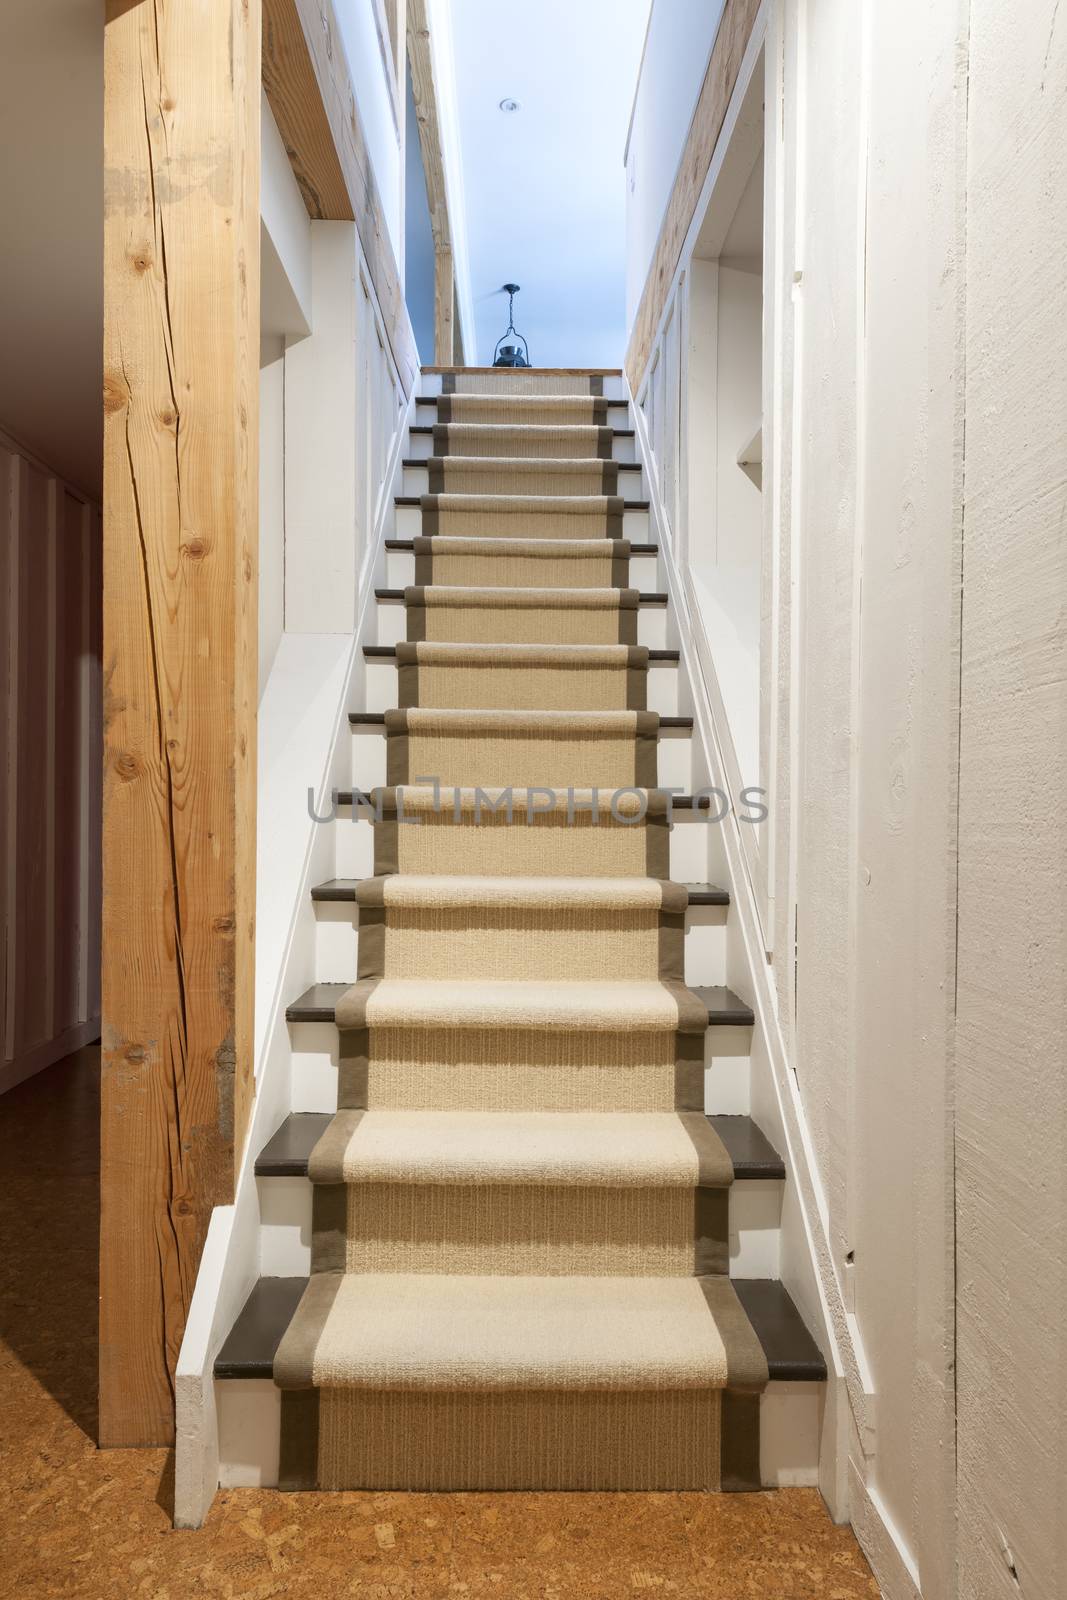 Stairway to basement in home interior with wood paneling